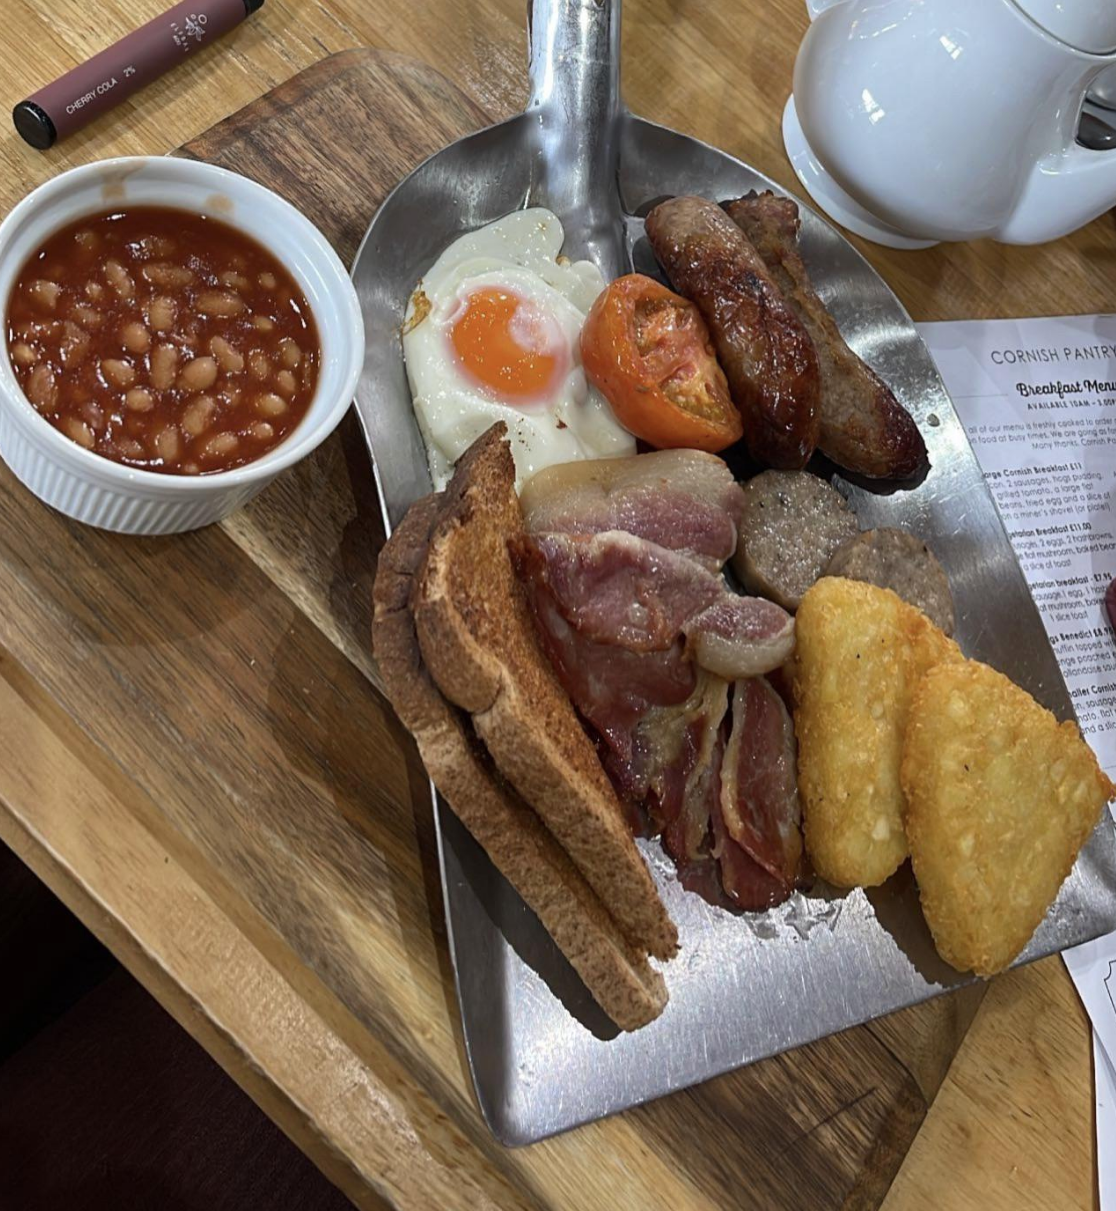 A large breakfast, with eggs, beans, toast, hash browns, ham, and sausage served on the scooper end of a shovel